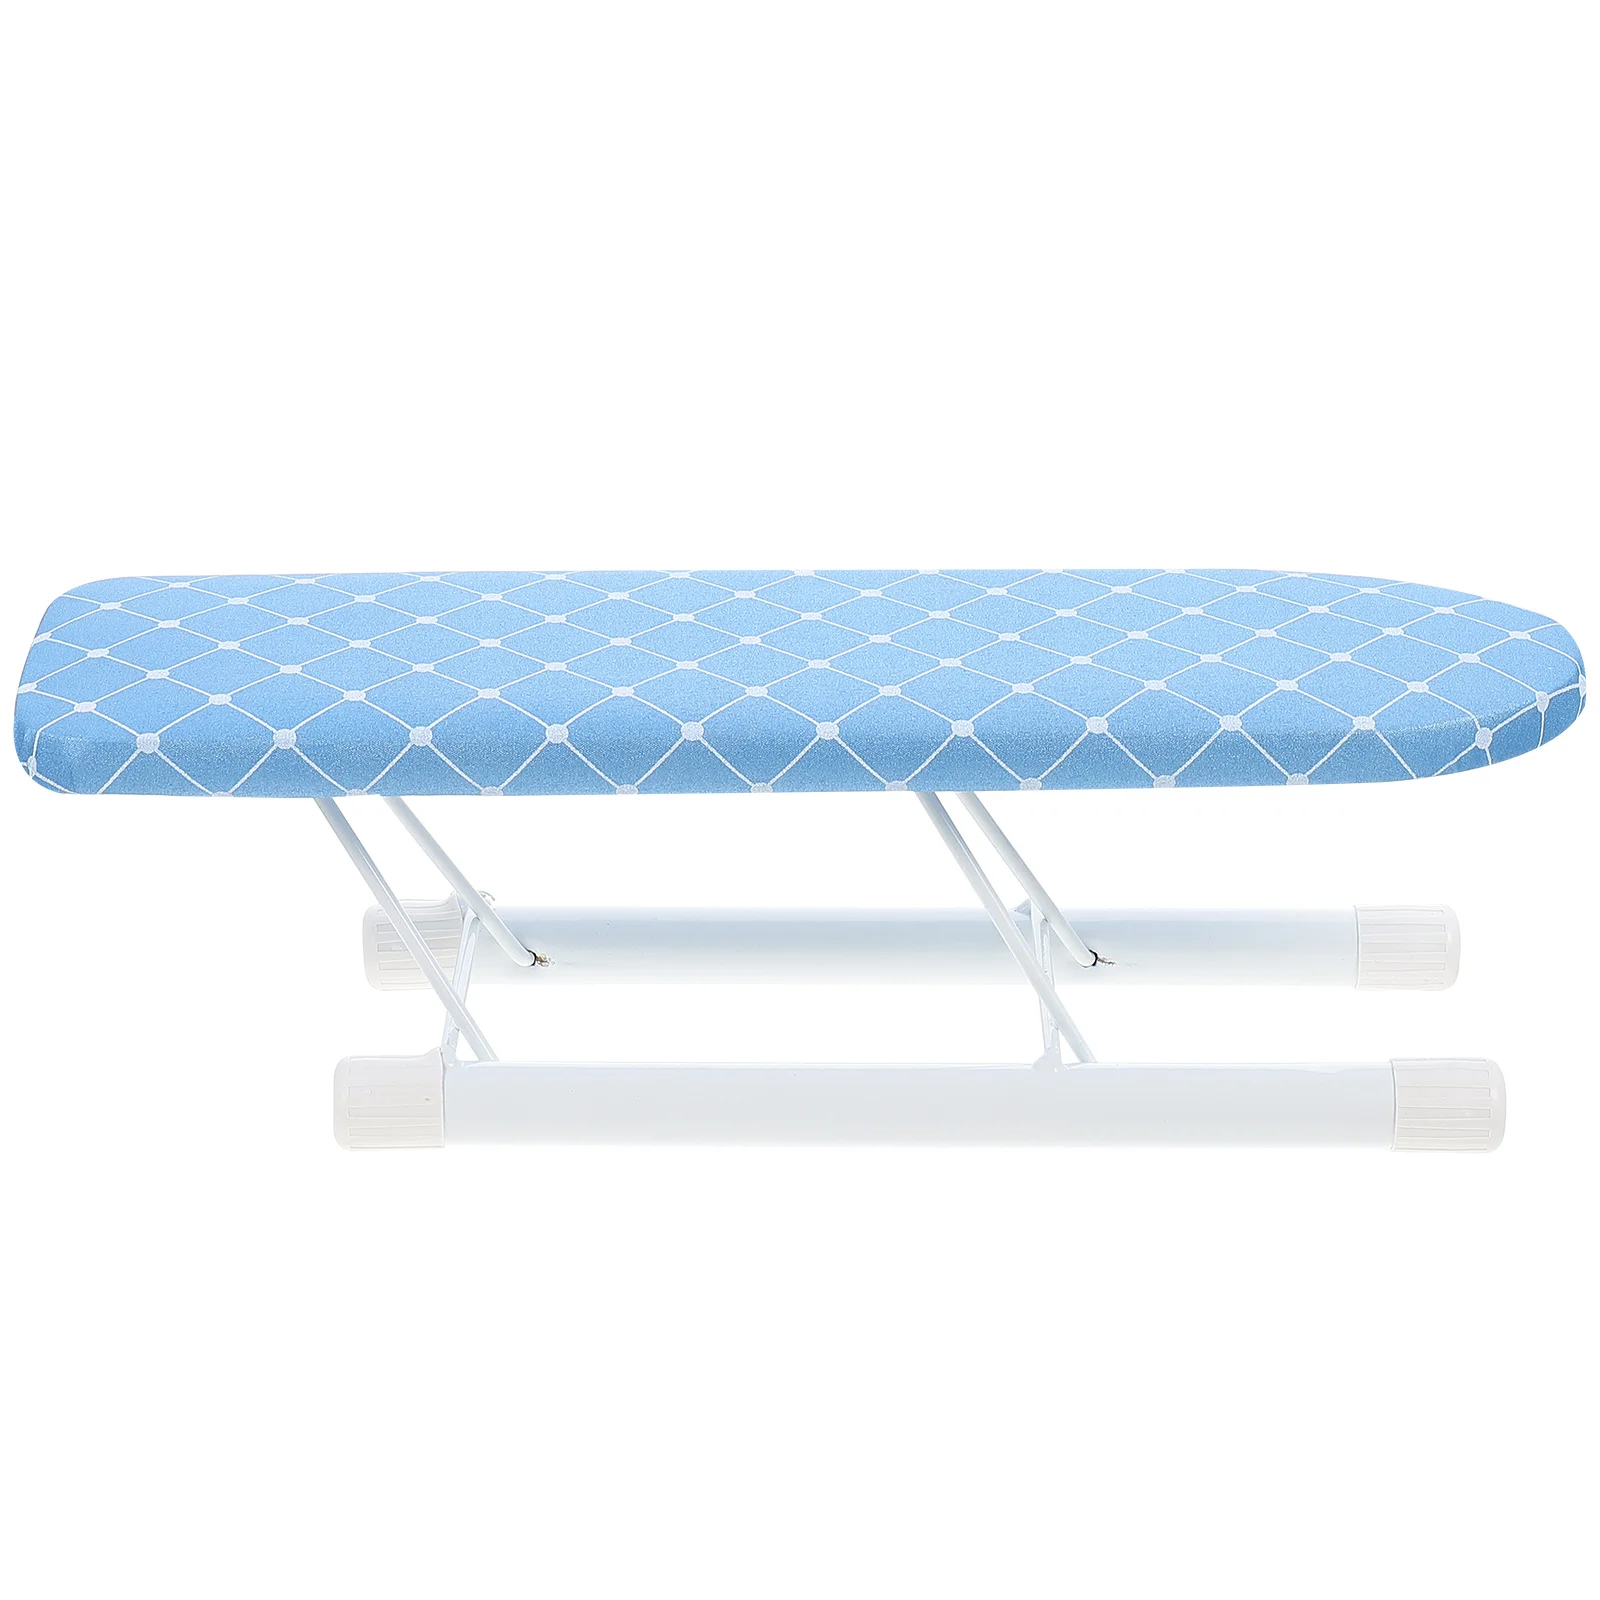 

Ironing Board Iron Tabletop Mini Table Portable Folding Foldable Boards Sleeve Rack Clothes Countertop Clothing Shelf Tool Bench